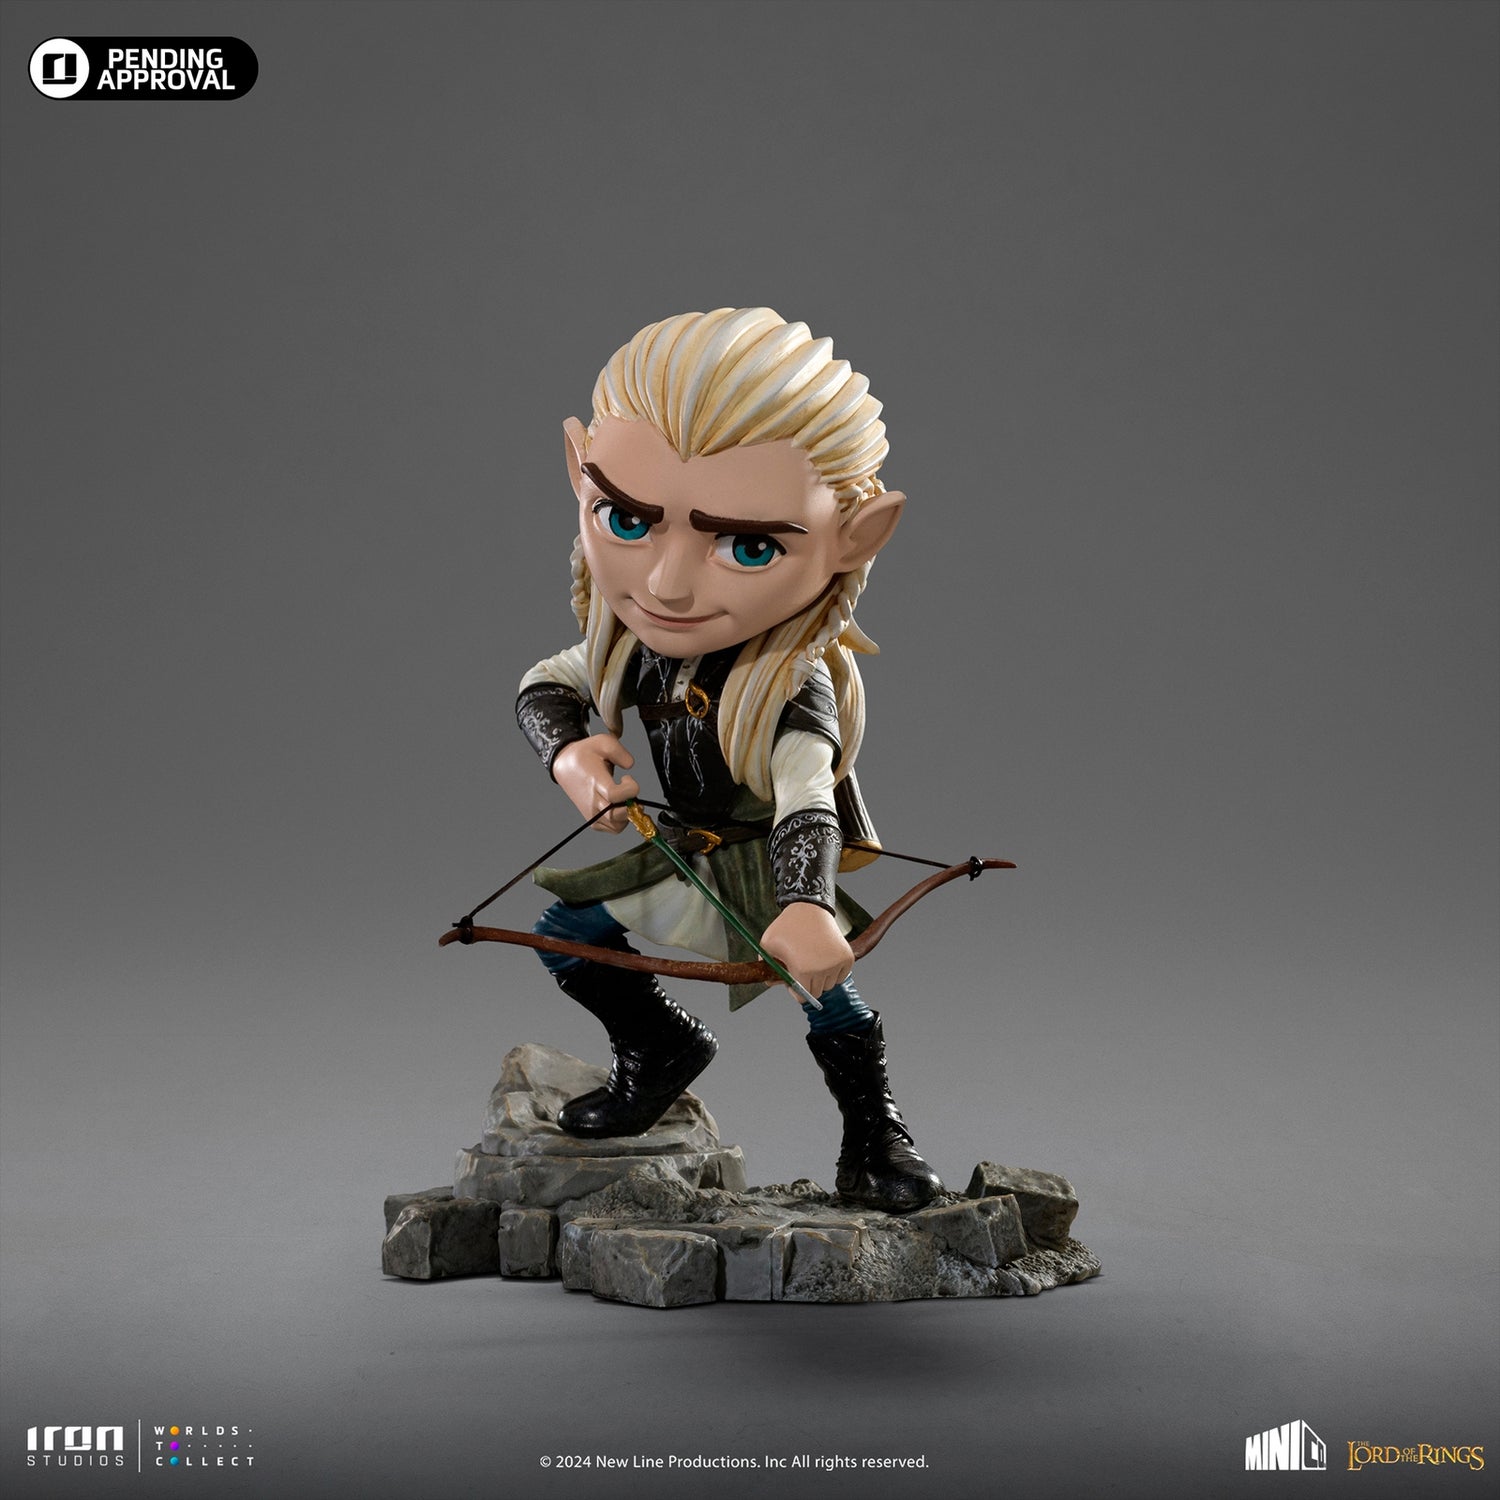 Iron Studios The Lord of The Rings Legolas Minico Limited Edition Figure (5.8")